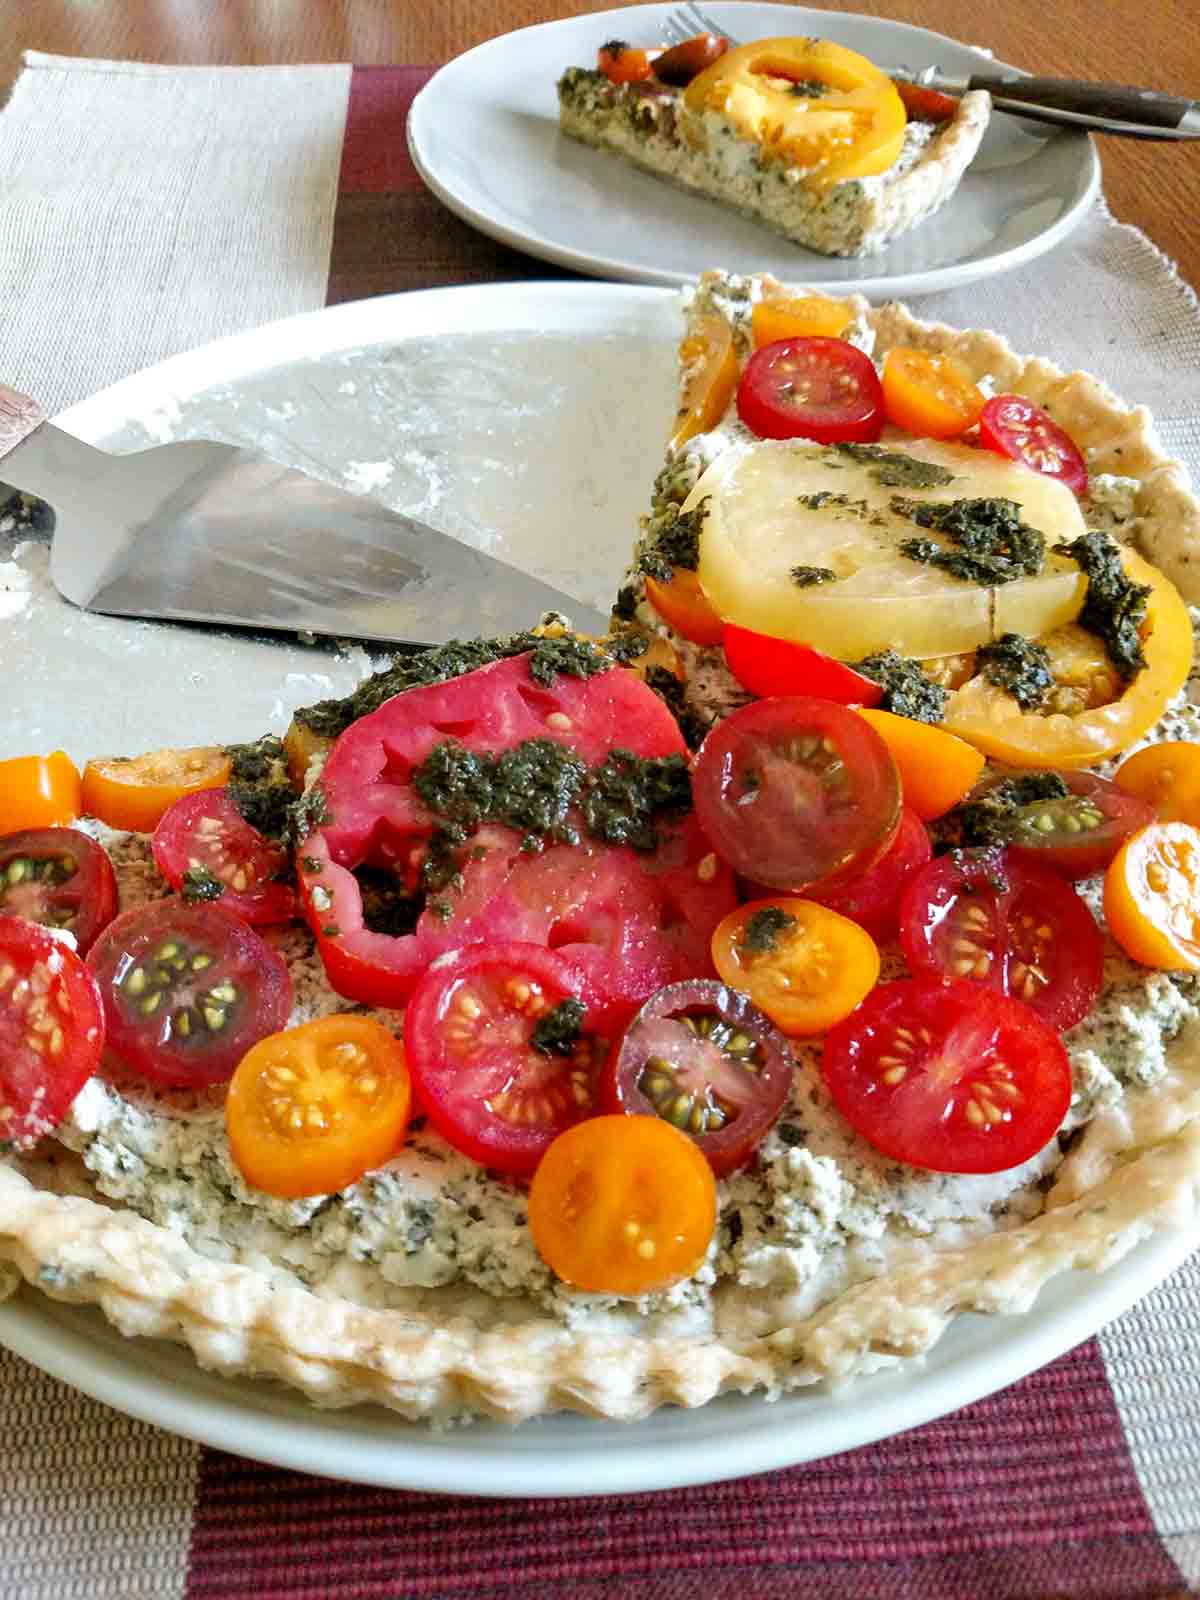 A fresh tomato tart in a herbed crust, drizzled with pesto vinaigrette.